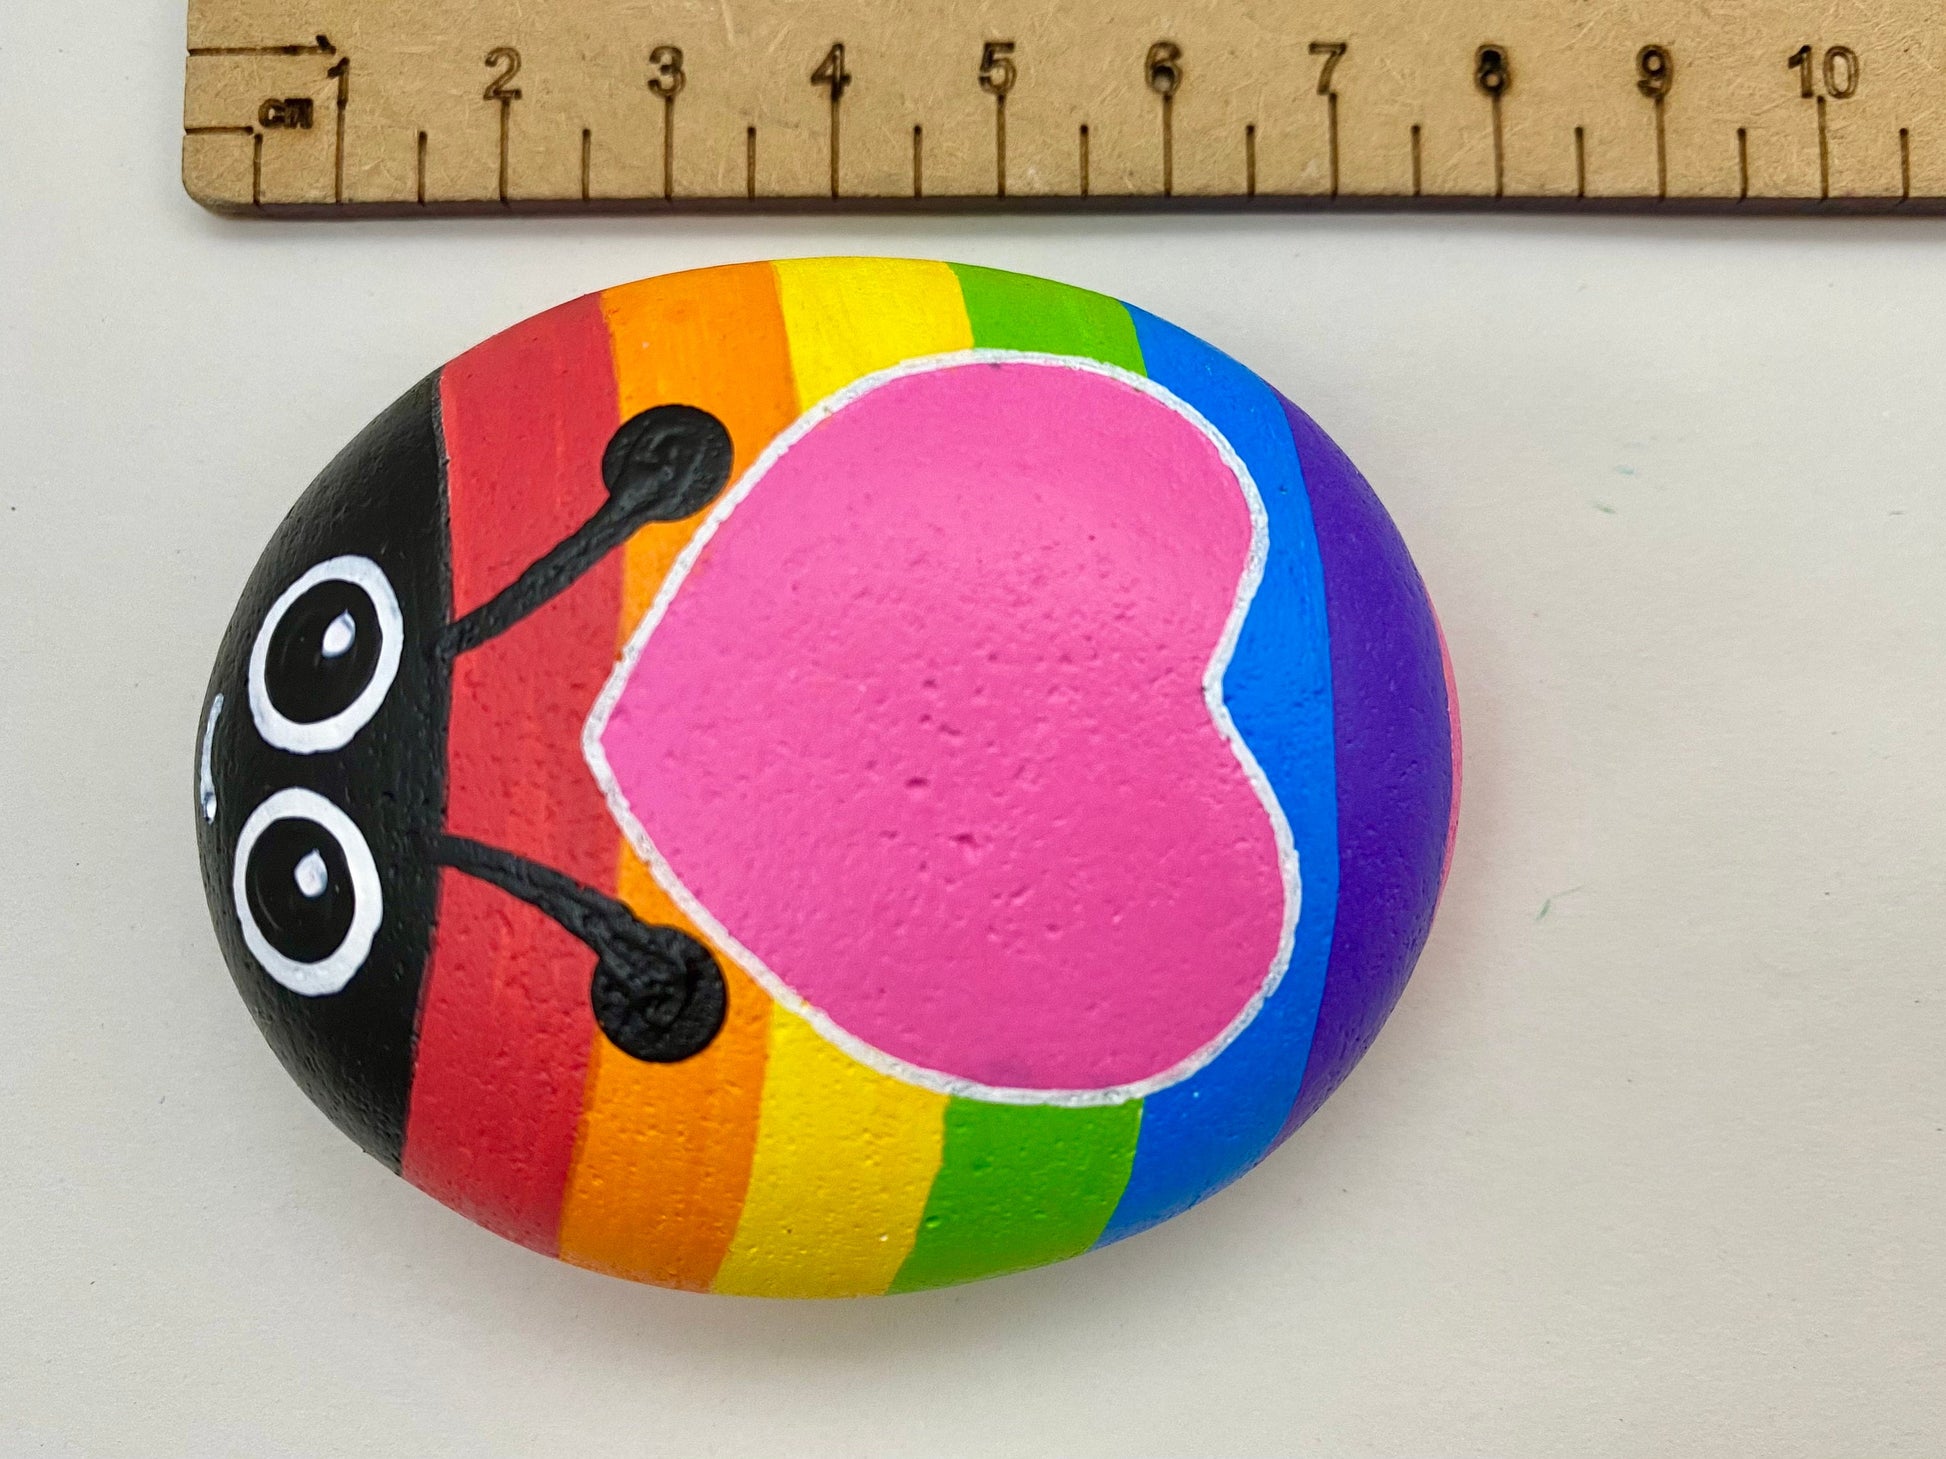 Hand painted Rainbow Bug with Heart Pebble next to a ruler